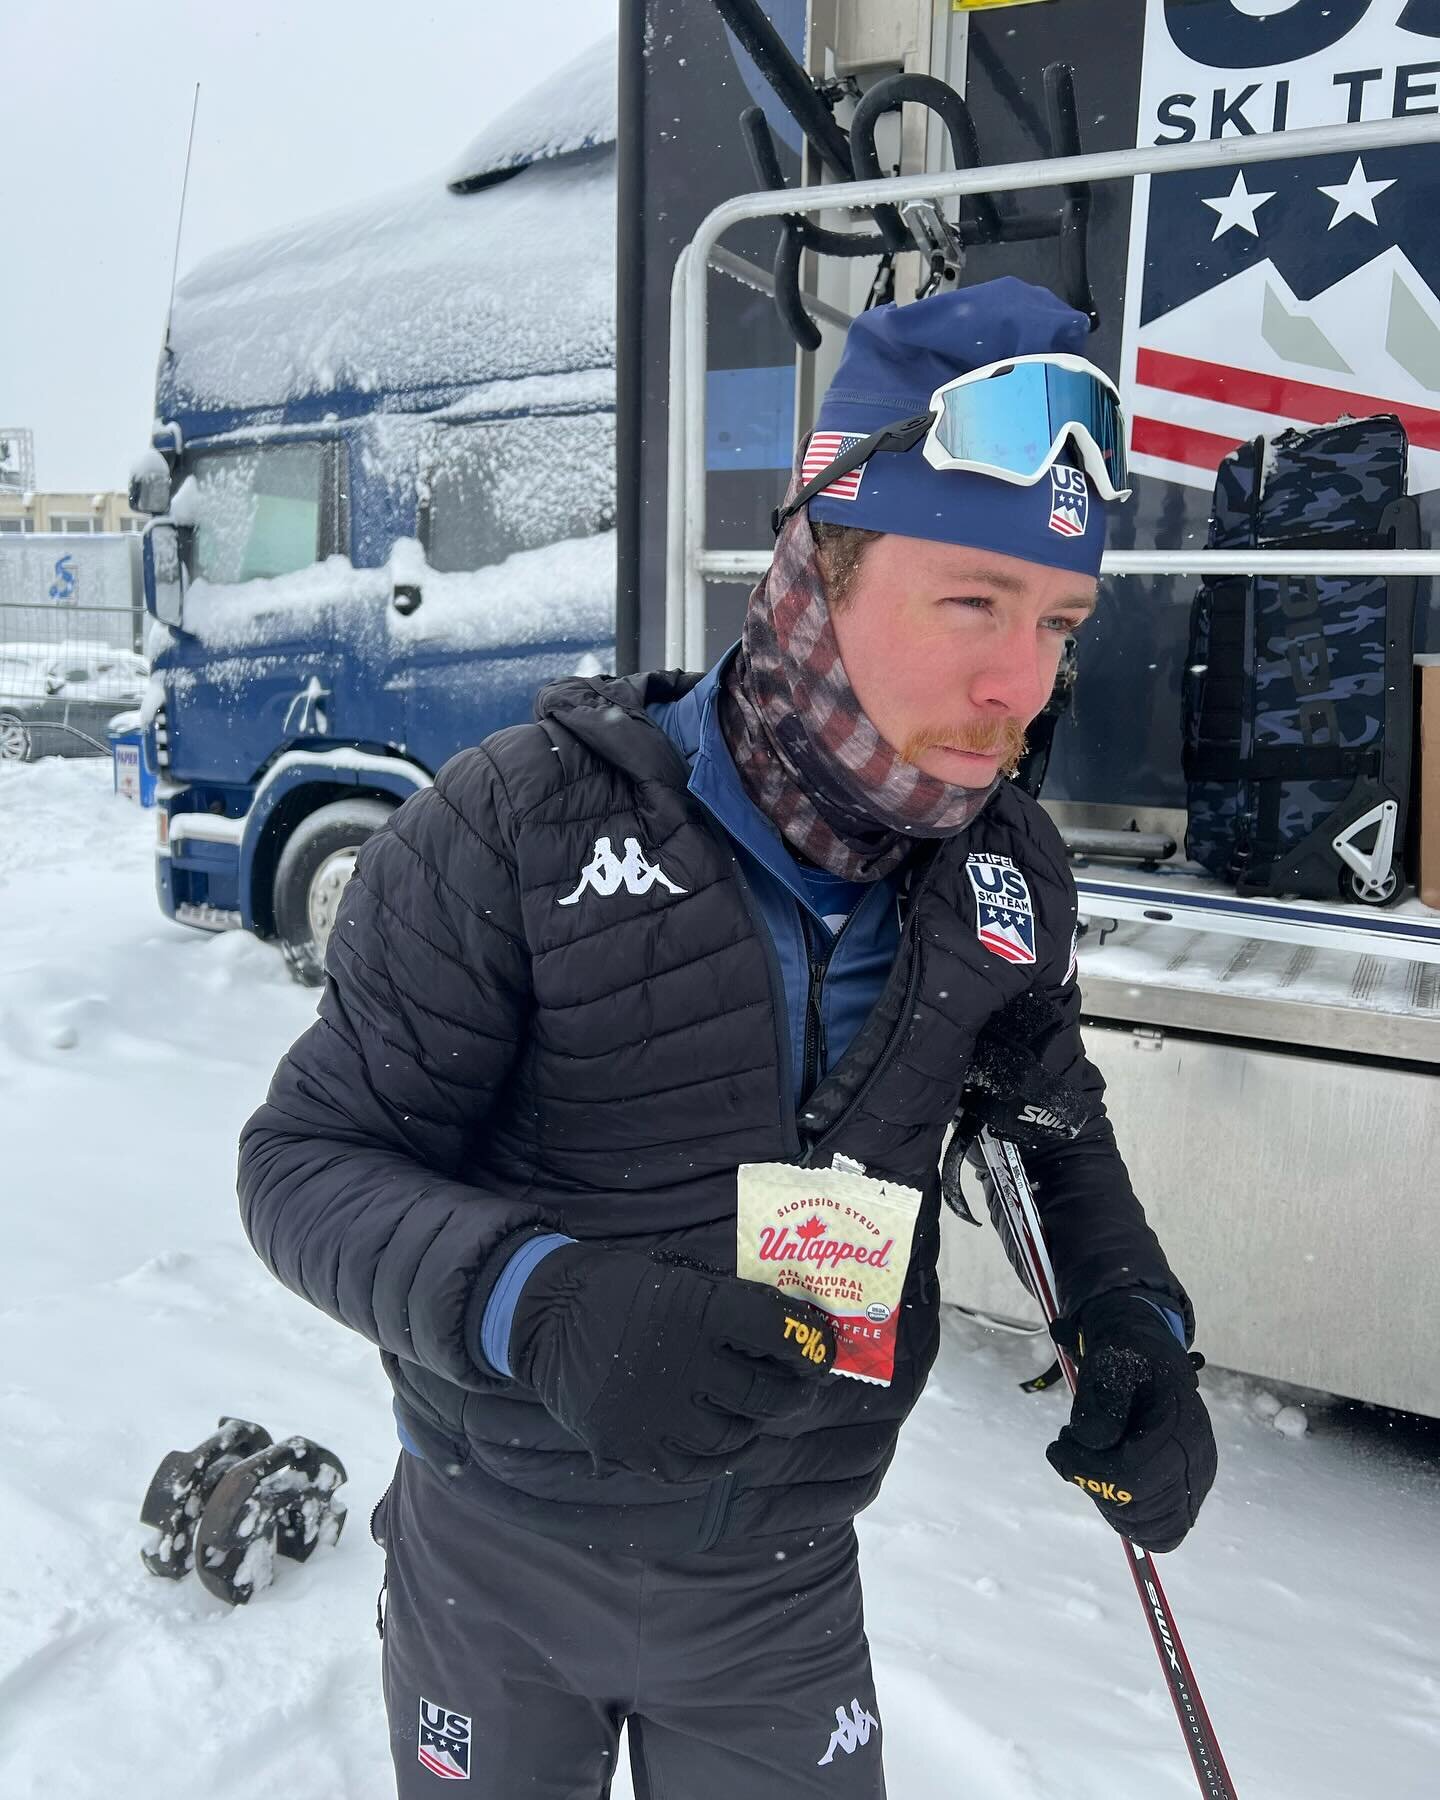 Happy waffle day people! Wish I was celebrating in the @usskiteam wax truck, but beautiful snowy Vermont will have to do! 

Now through Monday 3/25, @untappedmaple is celebrating international Waffle Day by delivering waffles to the people!  Use coup